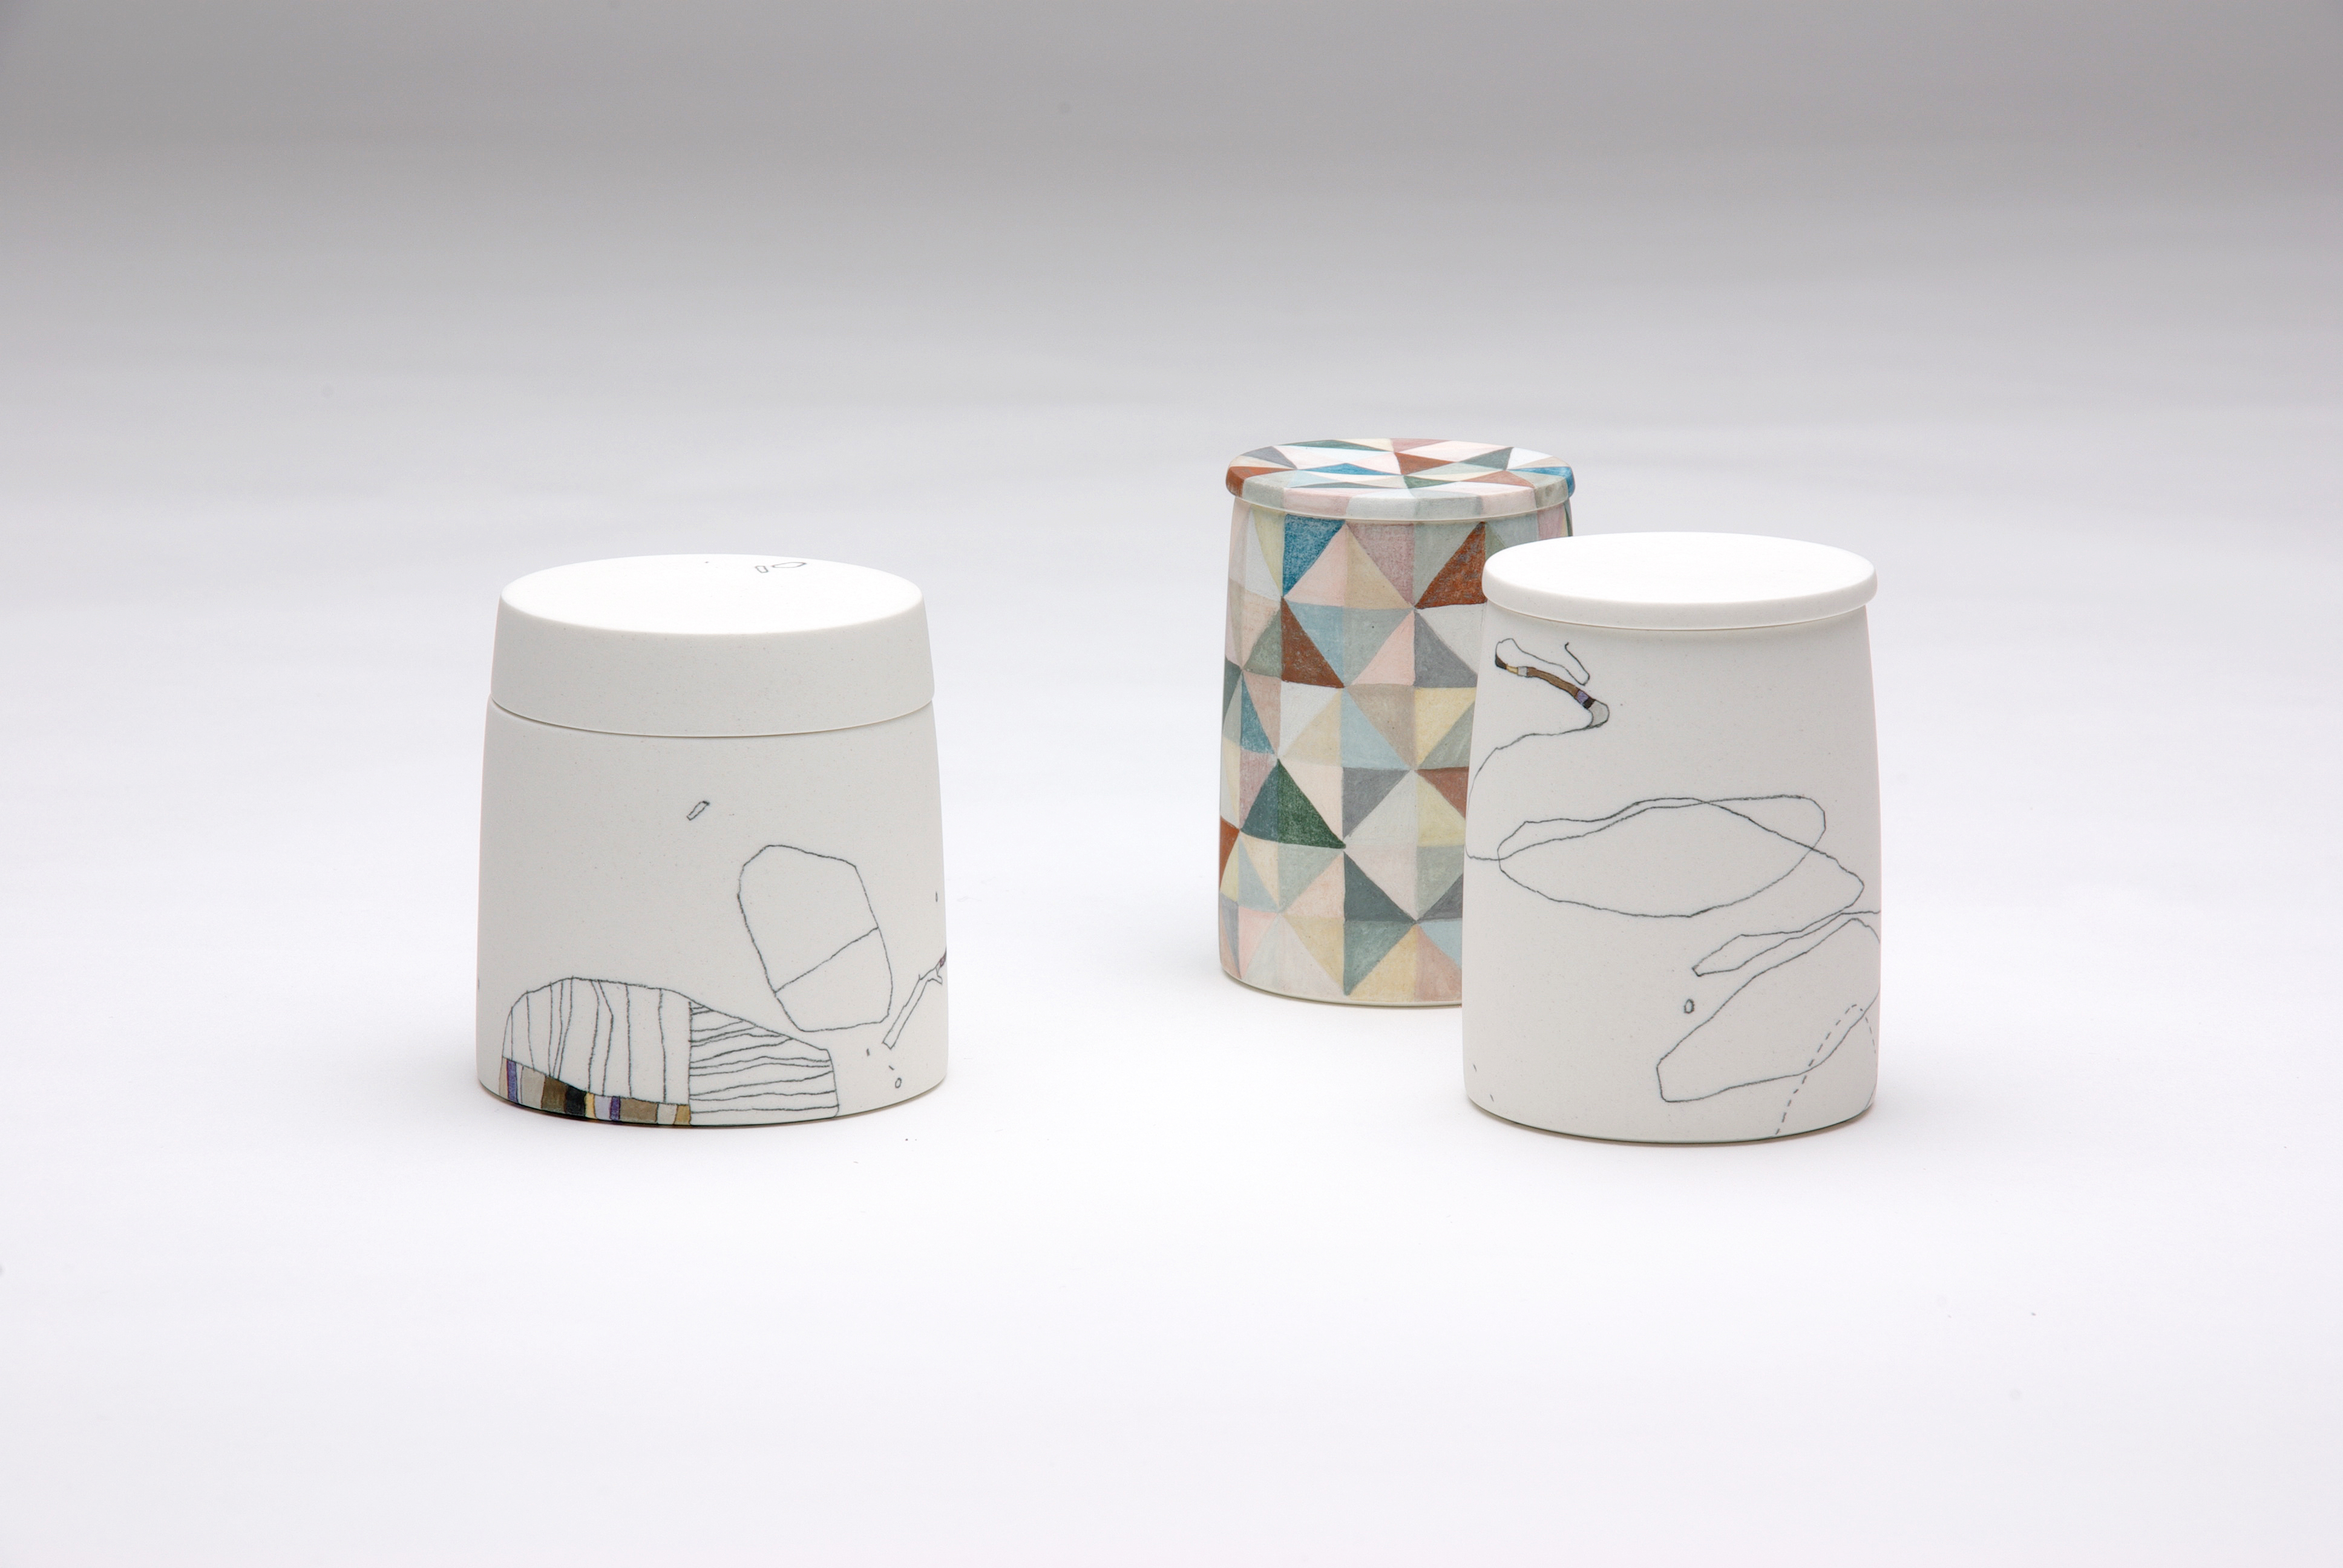 tania rollond tea containers 2016